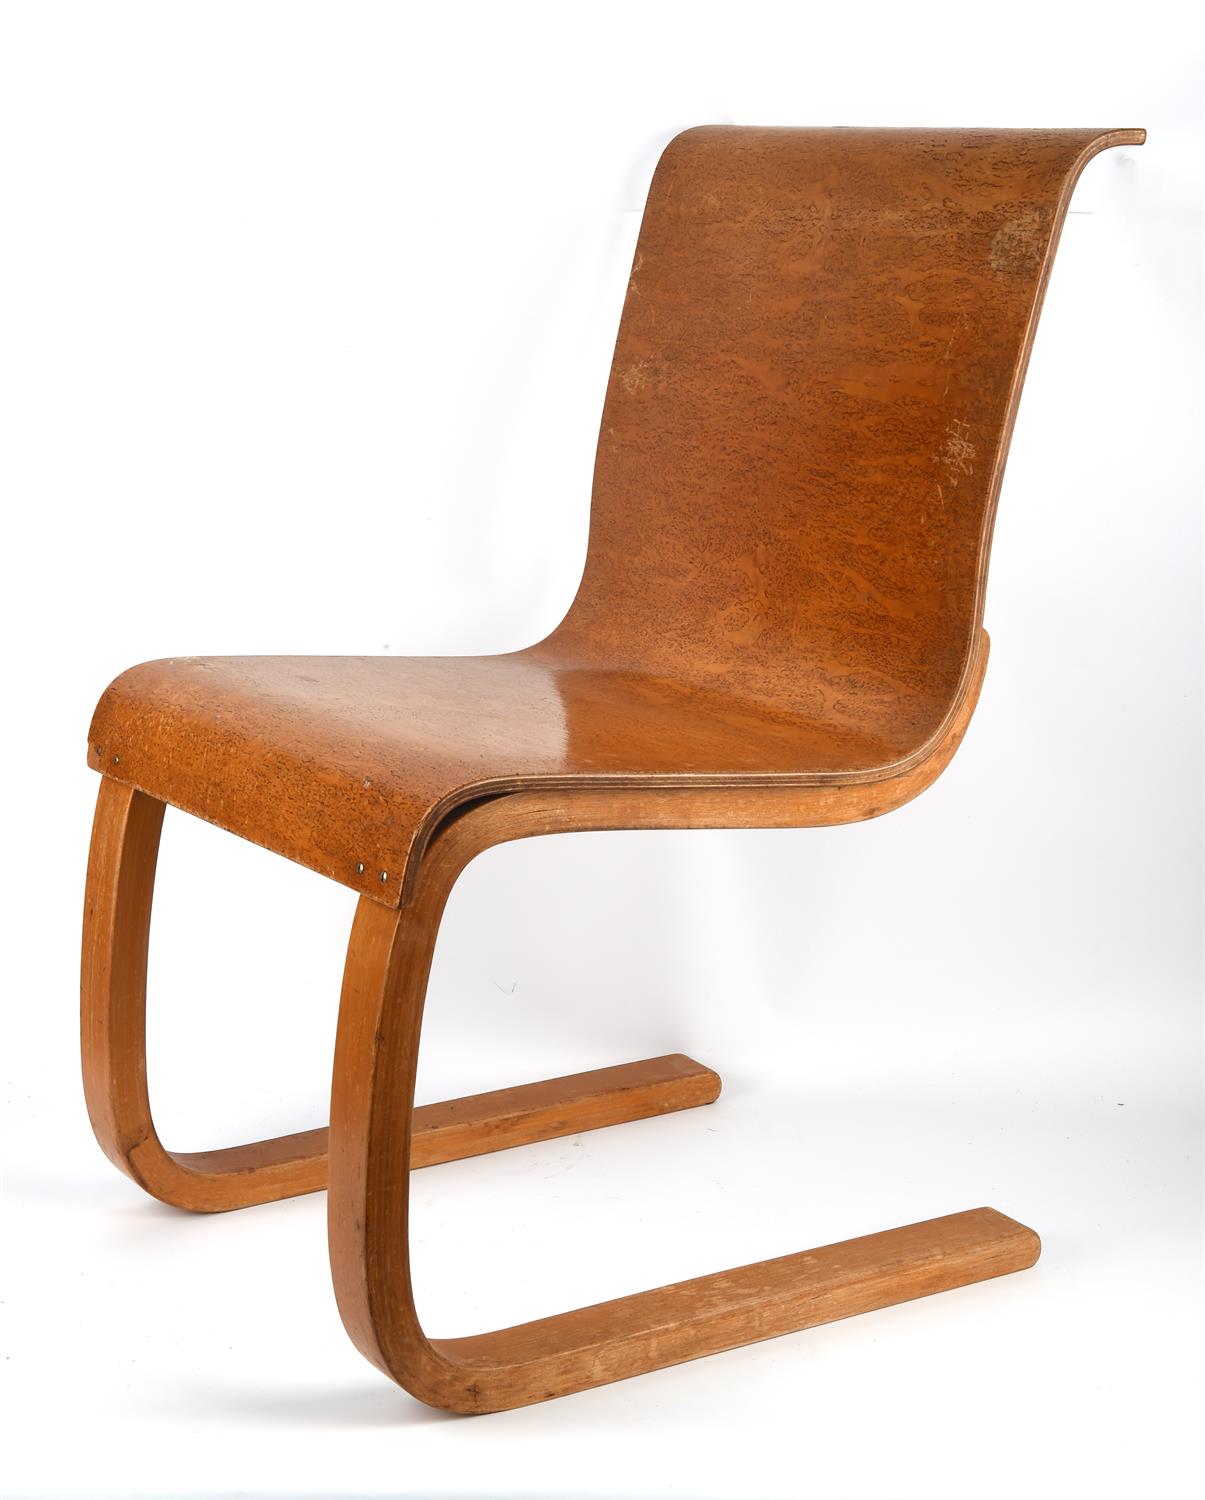 Alvar Aalto (Finnish, 1898-1976) for Finmar, pair of model 21 burr birch plywood chairs, - Image 12 of 18